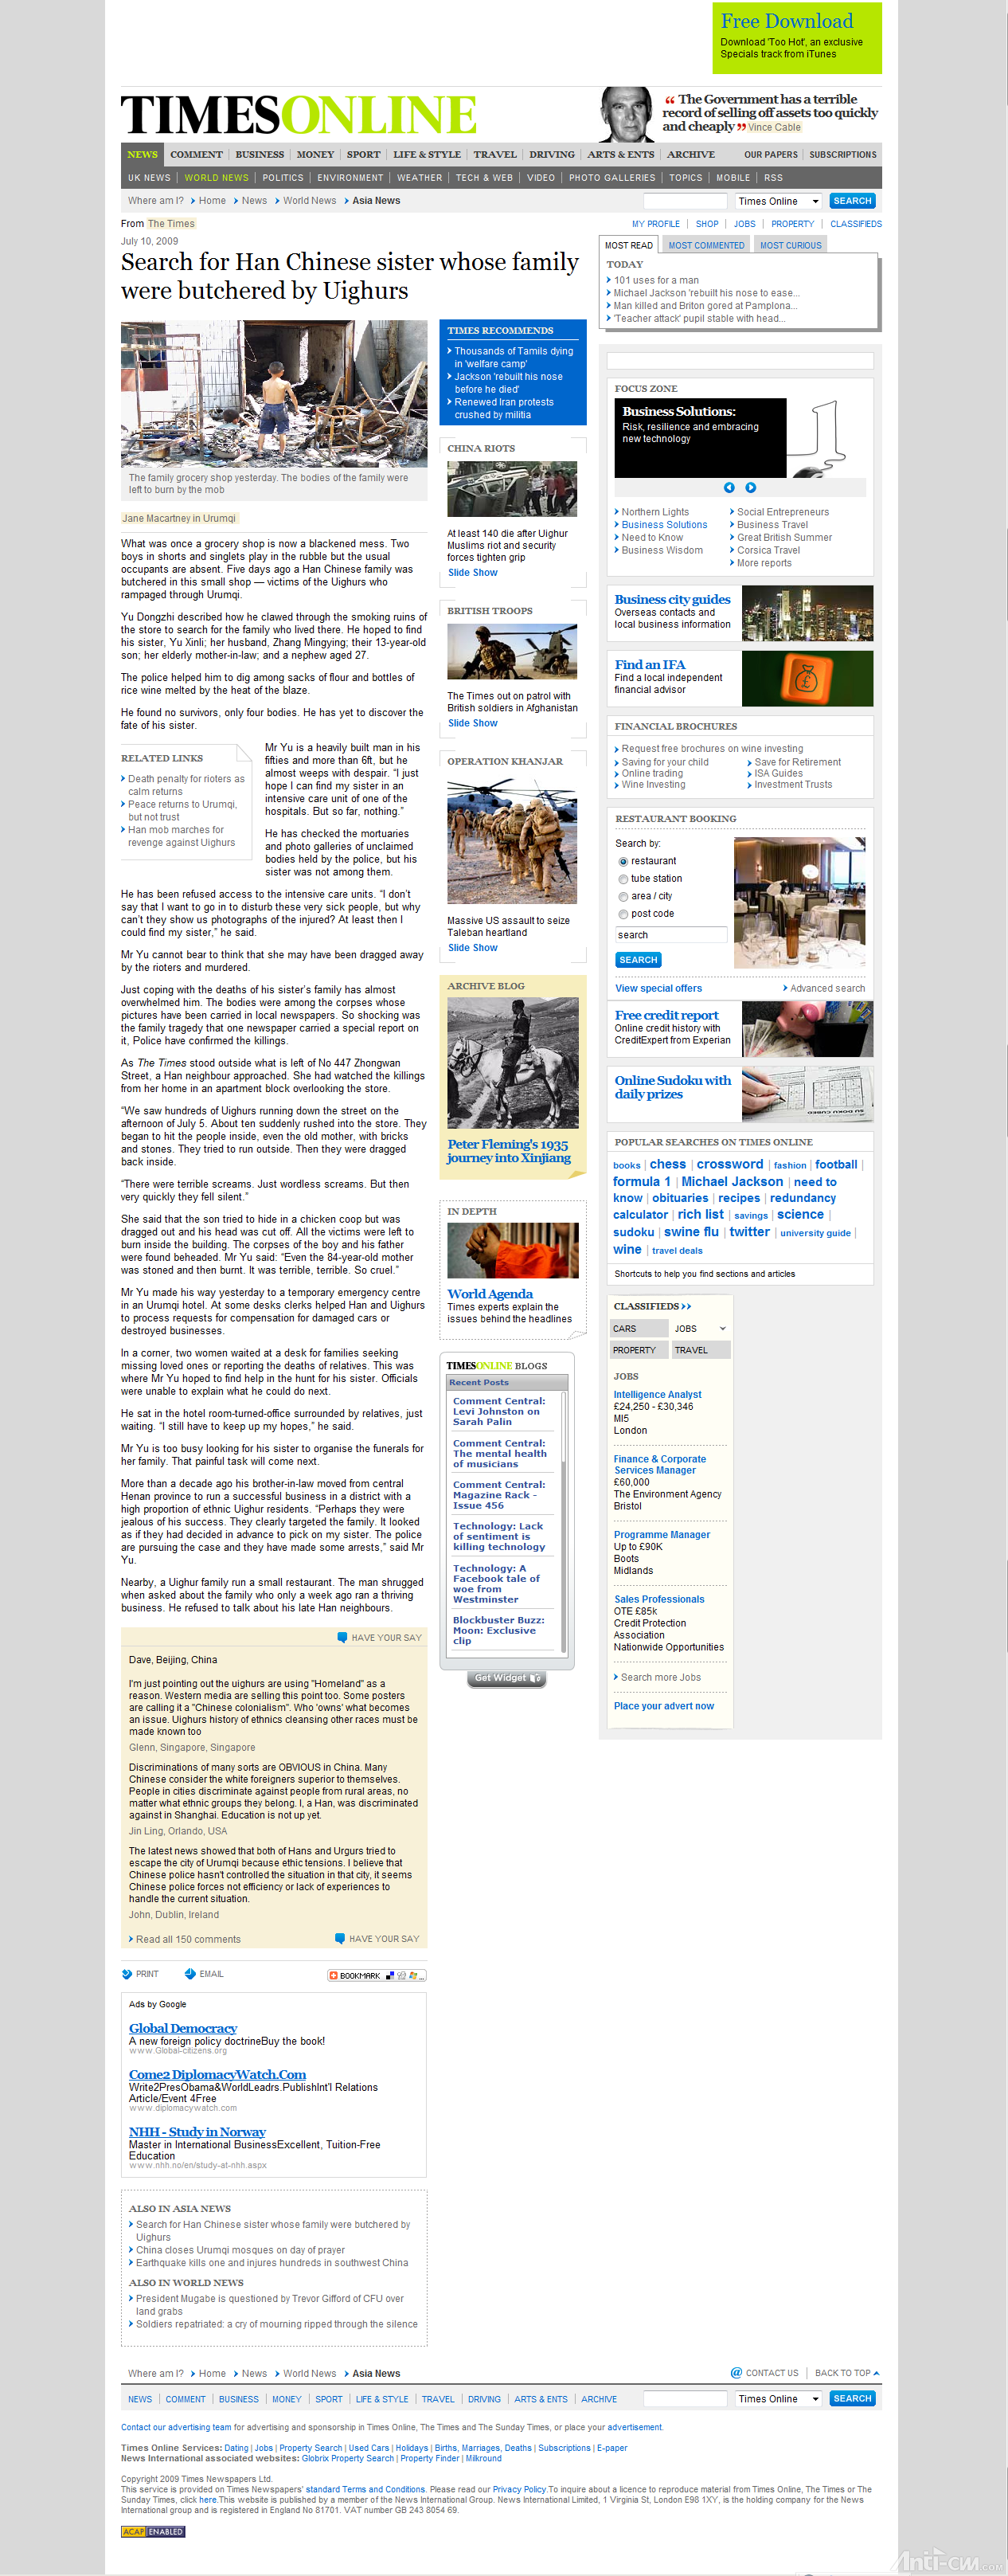 Timesonline-Search for Han Chinese sister whose family were butchered by Uighurs.png